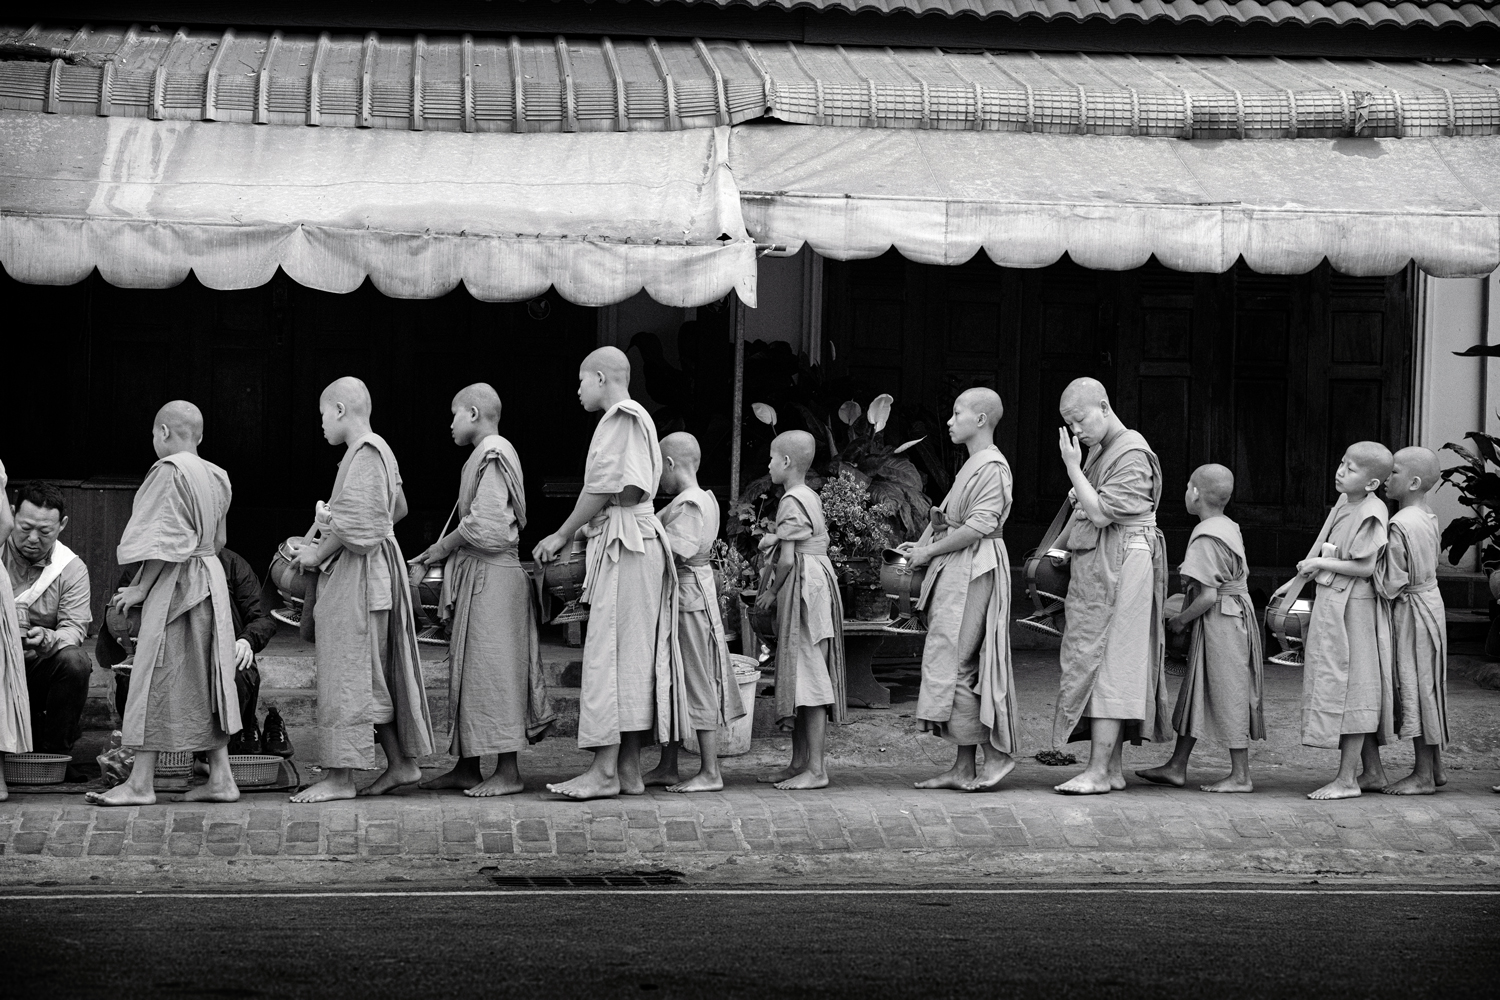 a group of young monks standing in a line